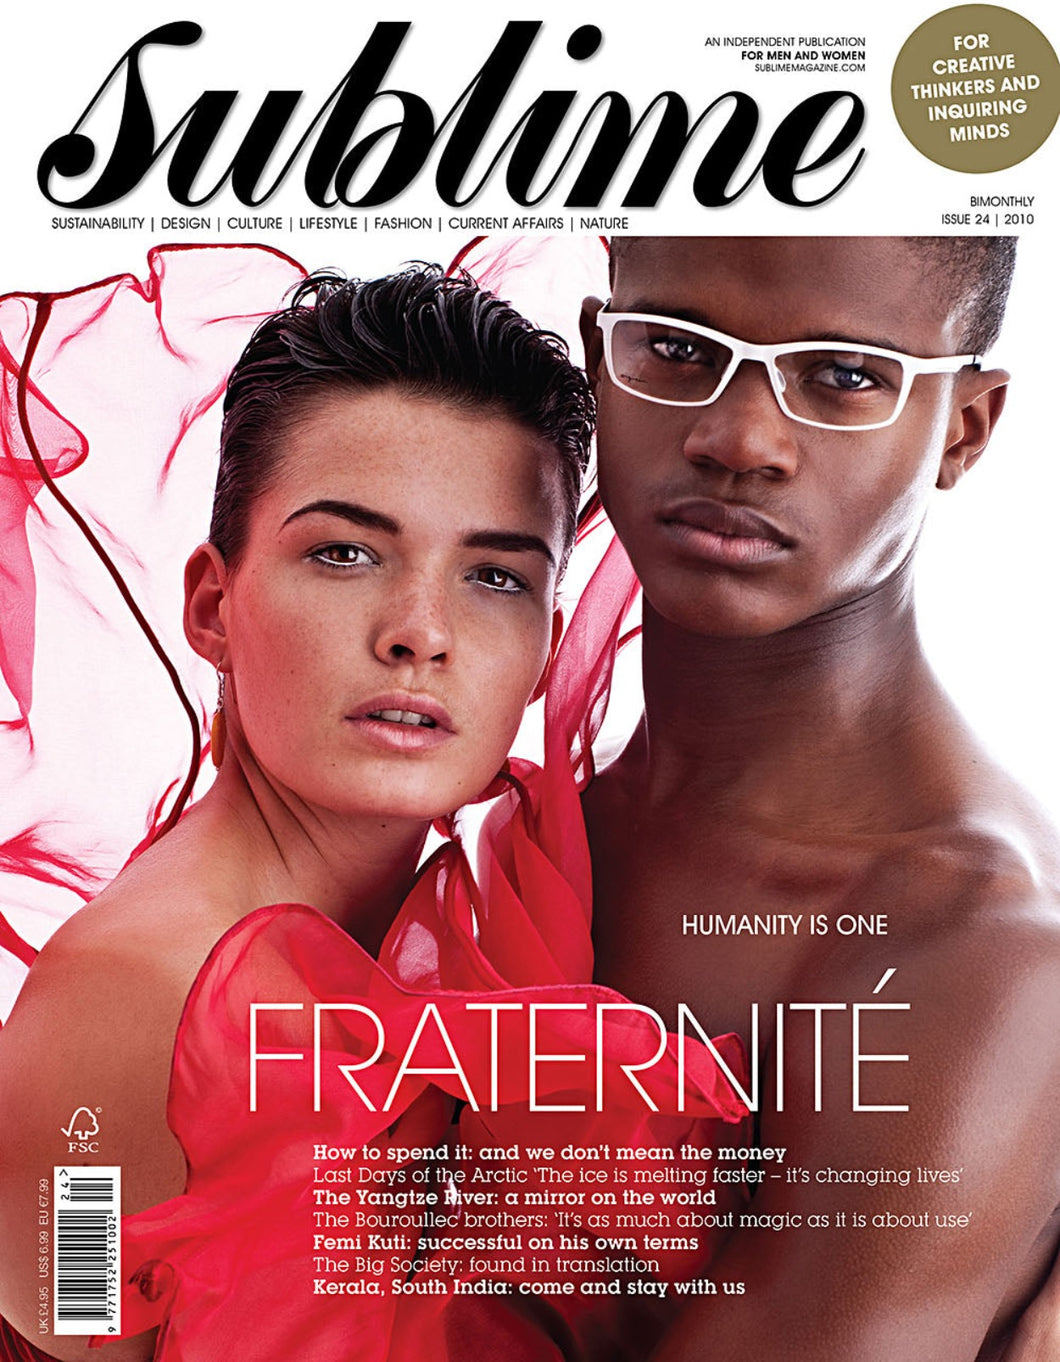 Issue 24 - Fraternité